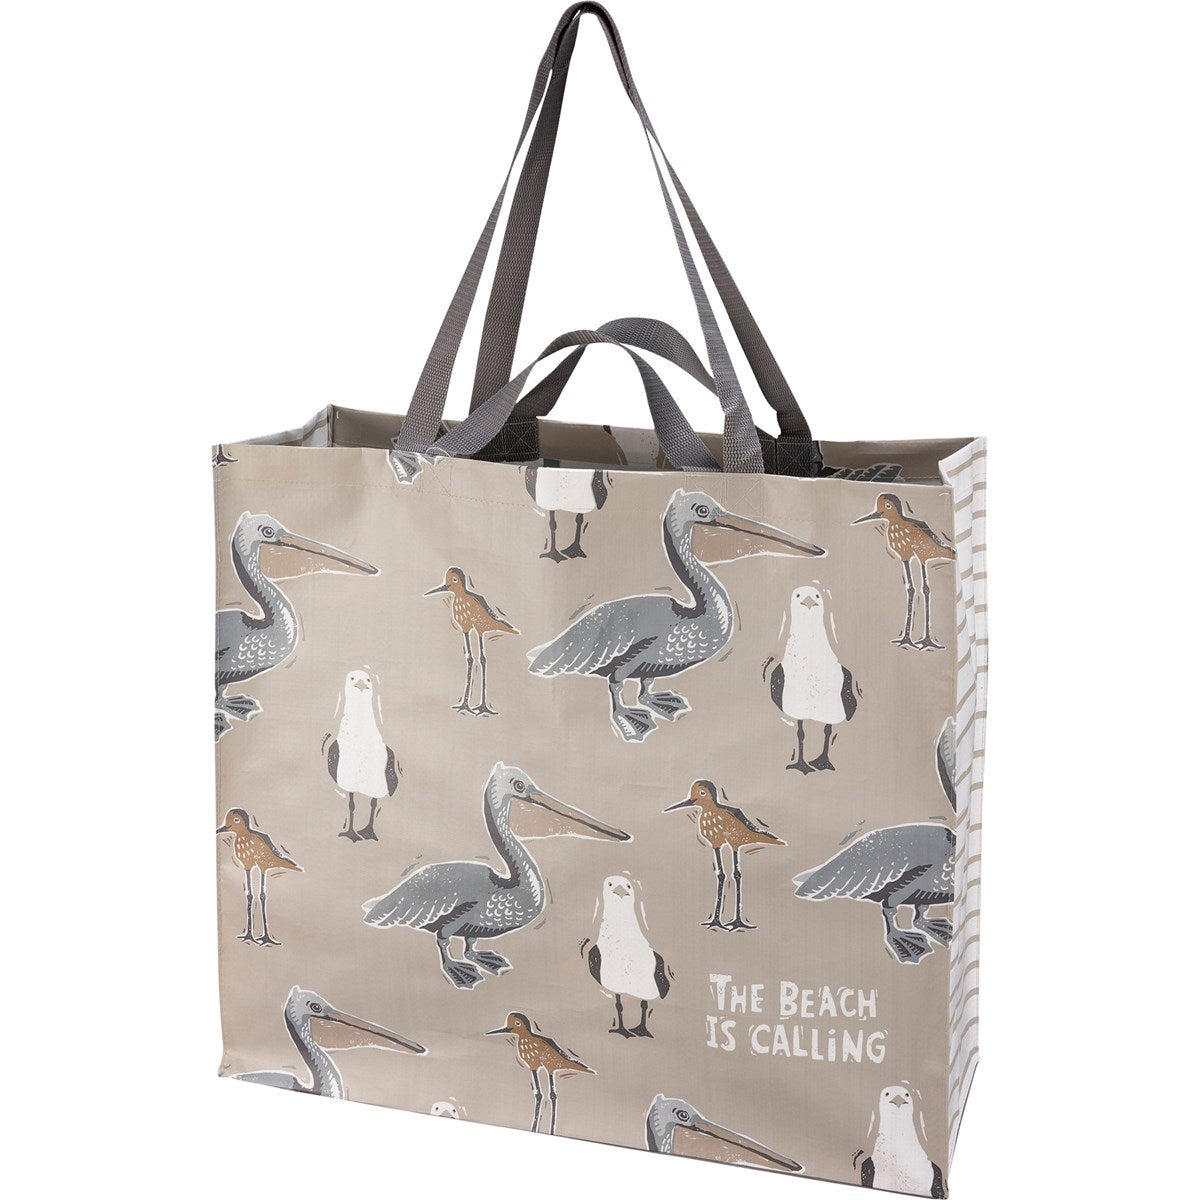 The Beach is Calling Shopping Tote